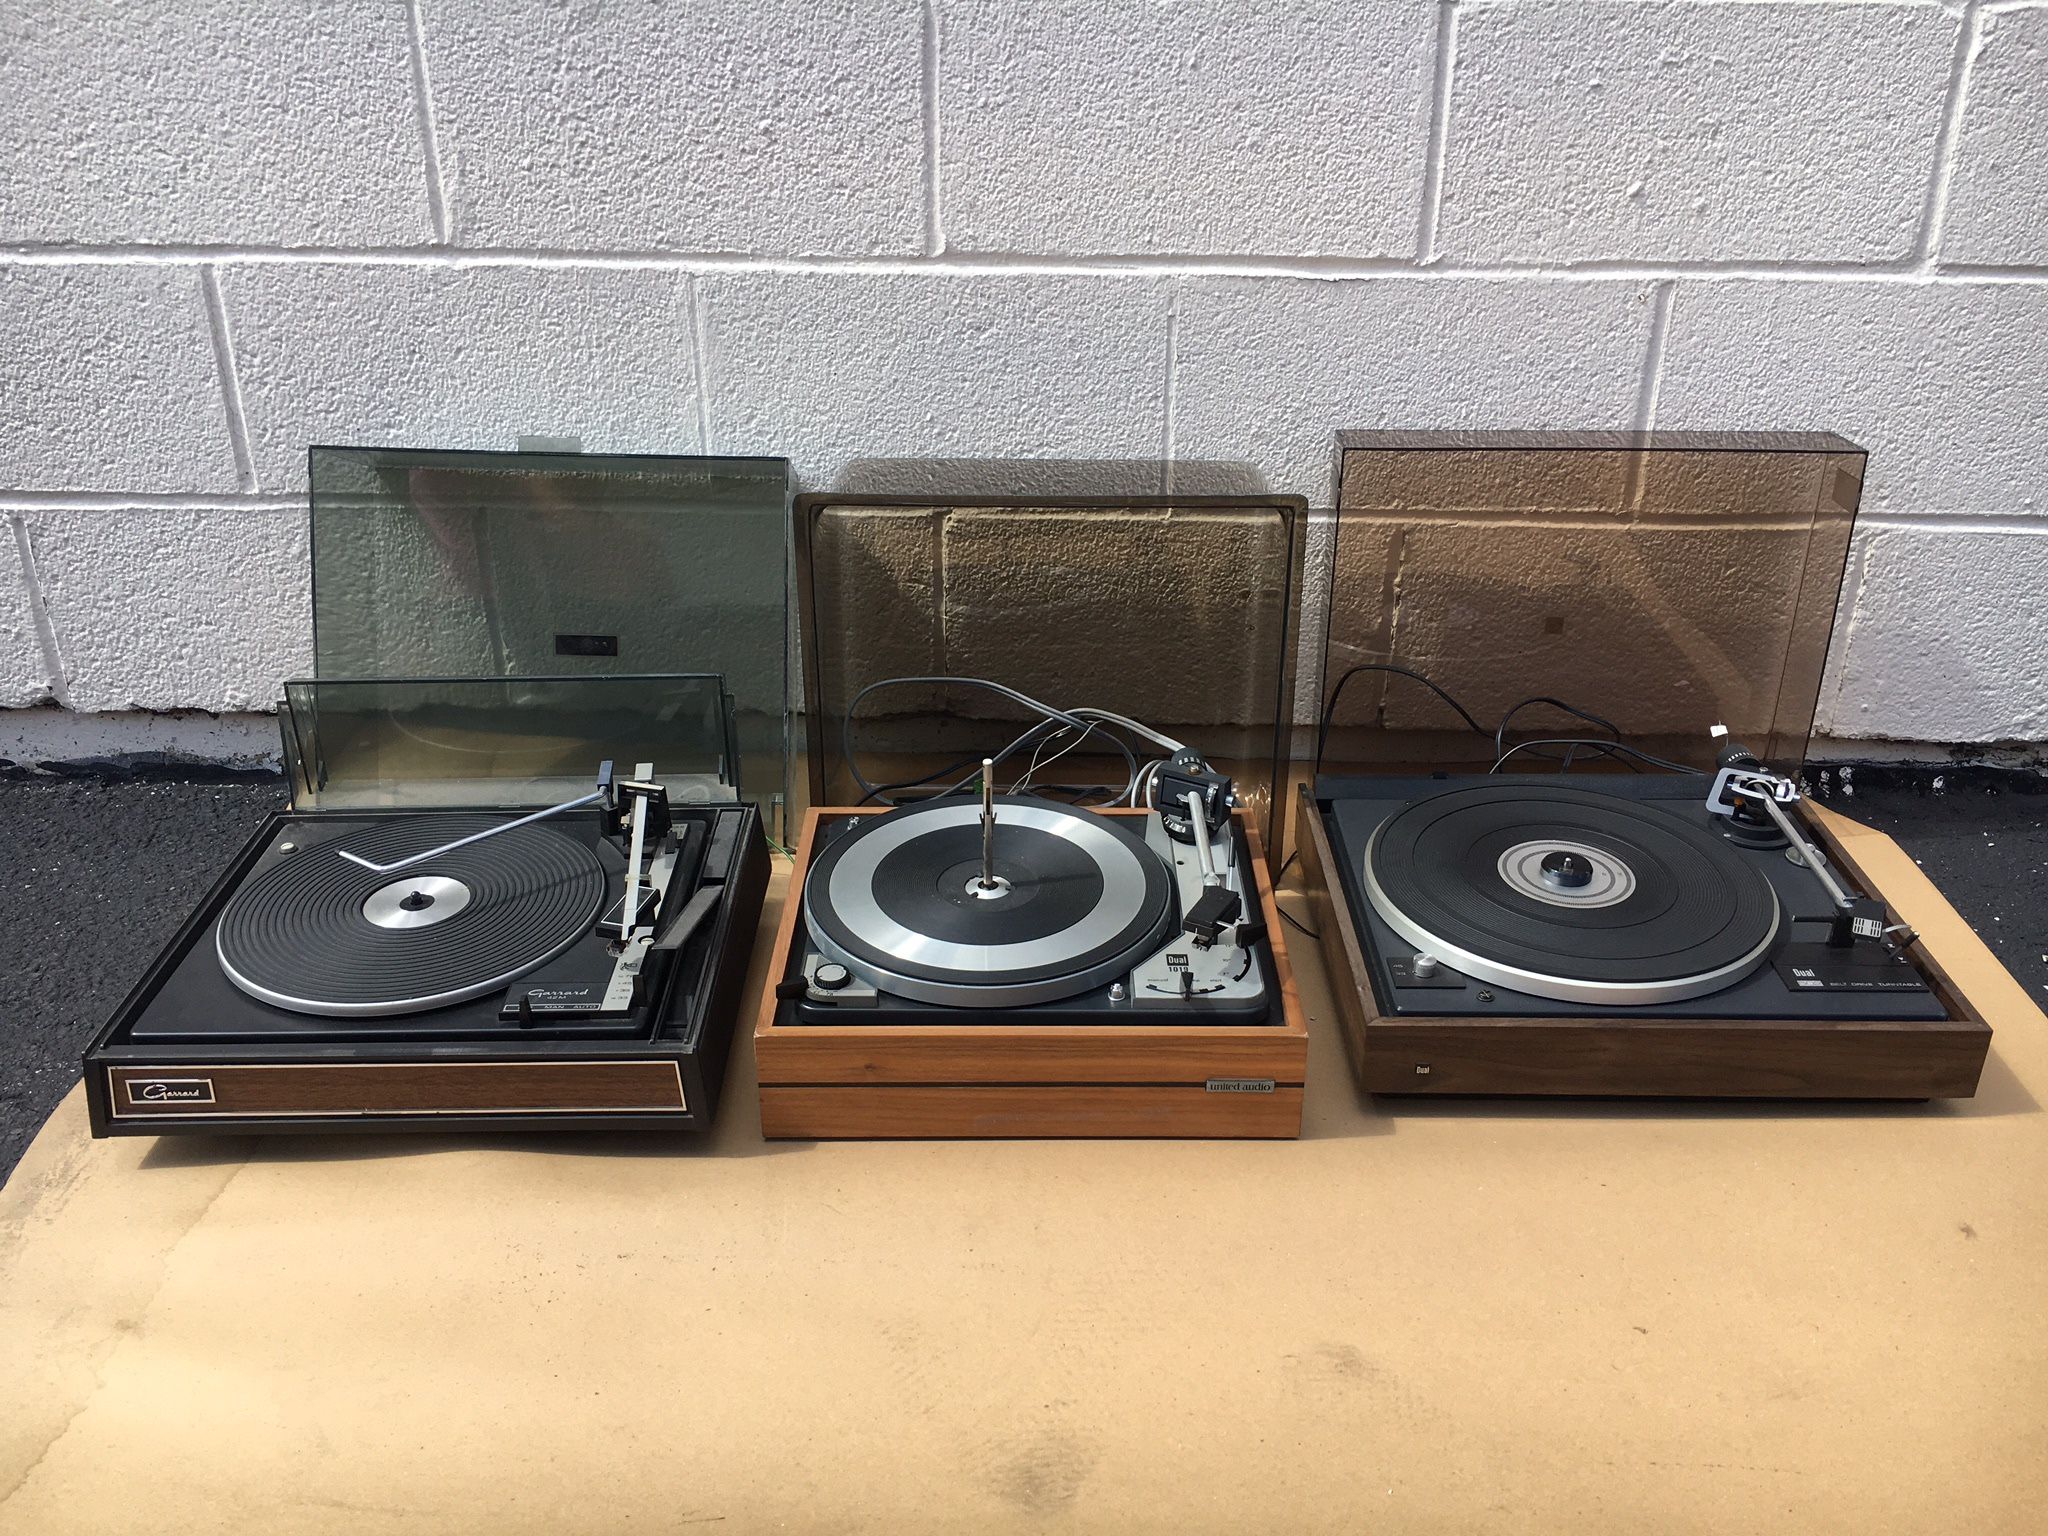 Vintage Record Players, Stereo receivers, and Tape Deck